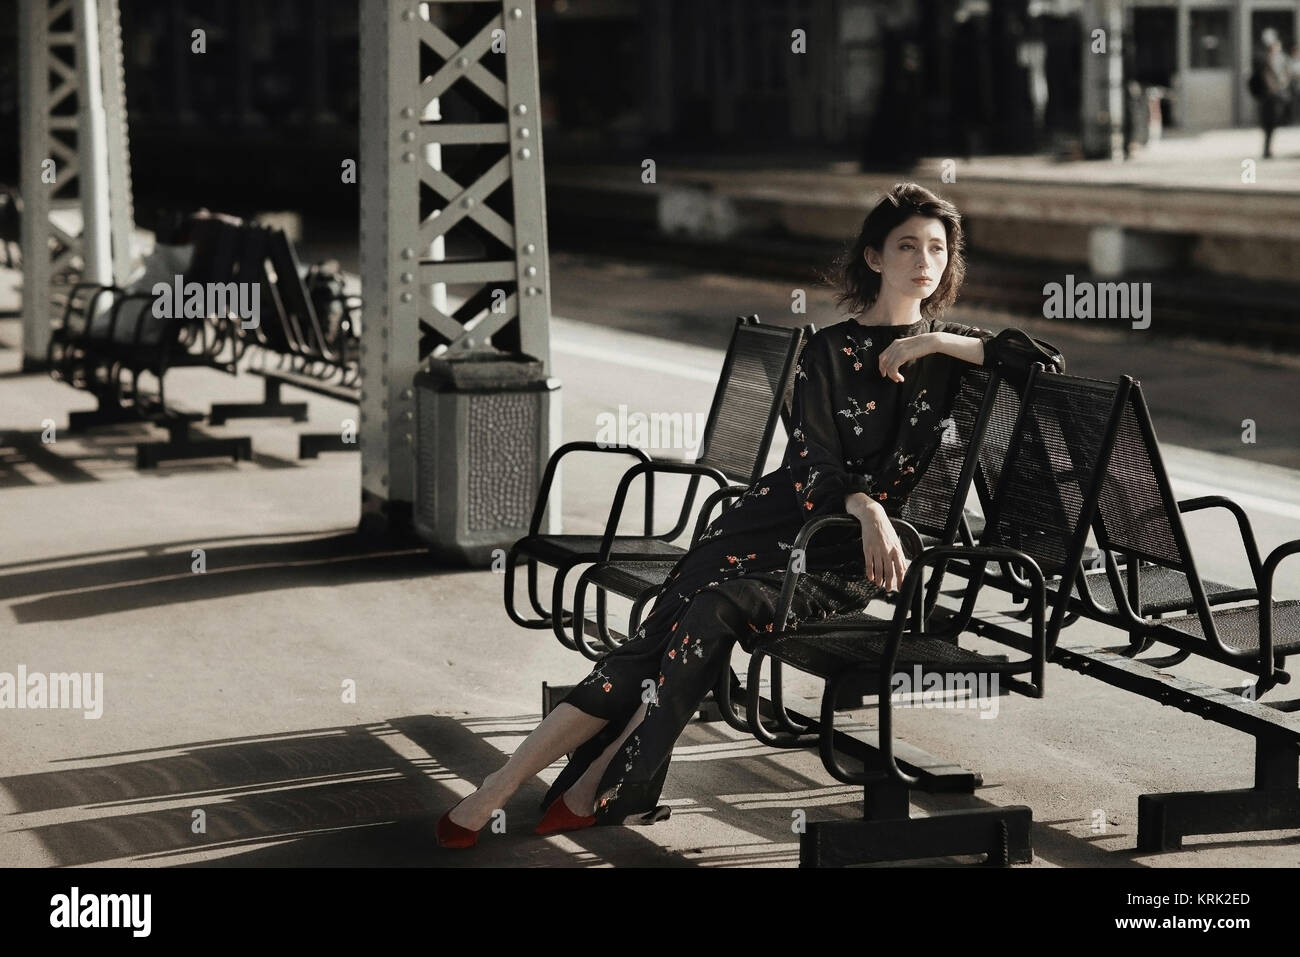 Caucasian woman sitting on bench at train station Banque D'Images